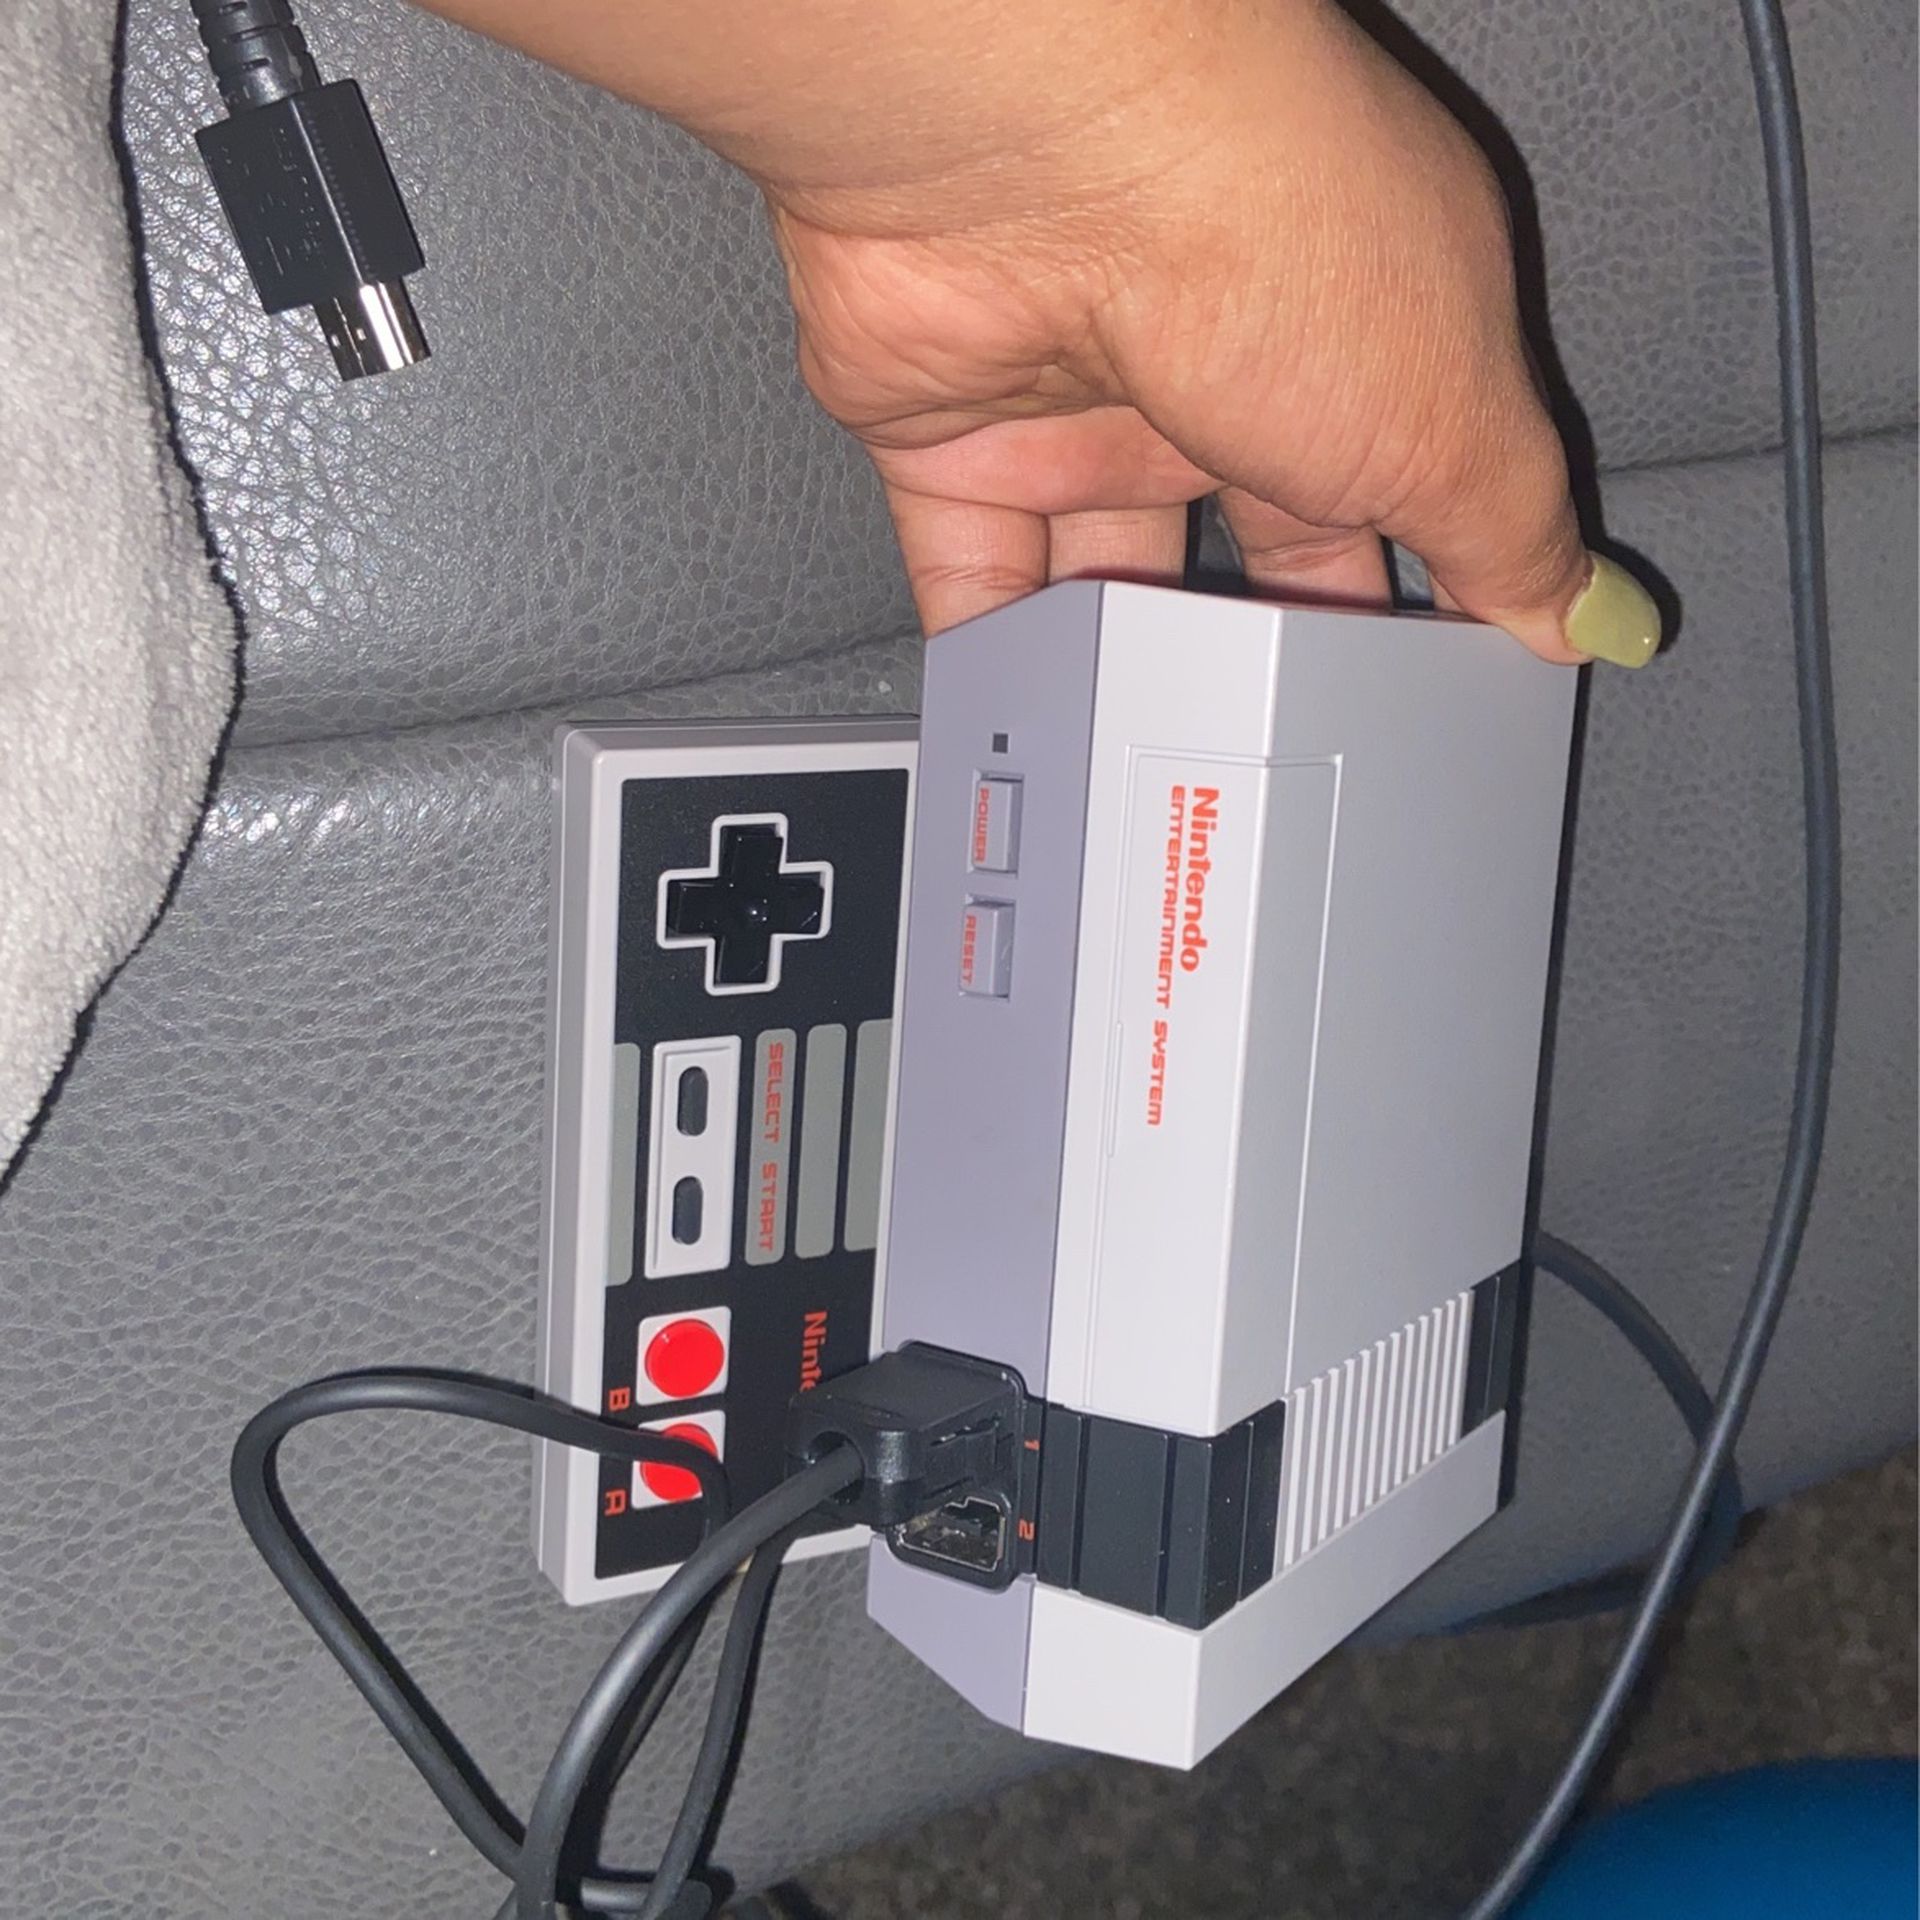 Nintendo Mini System With Games Pre Installed